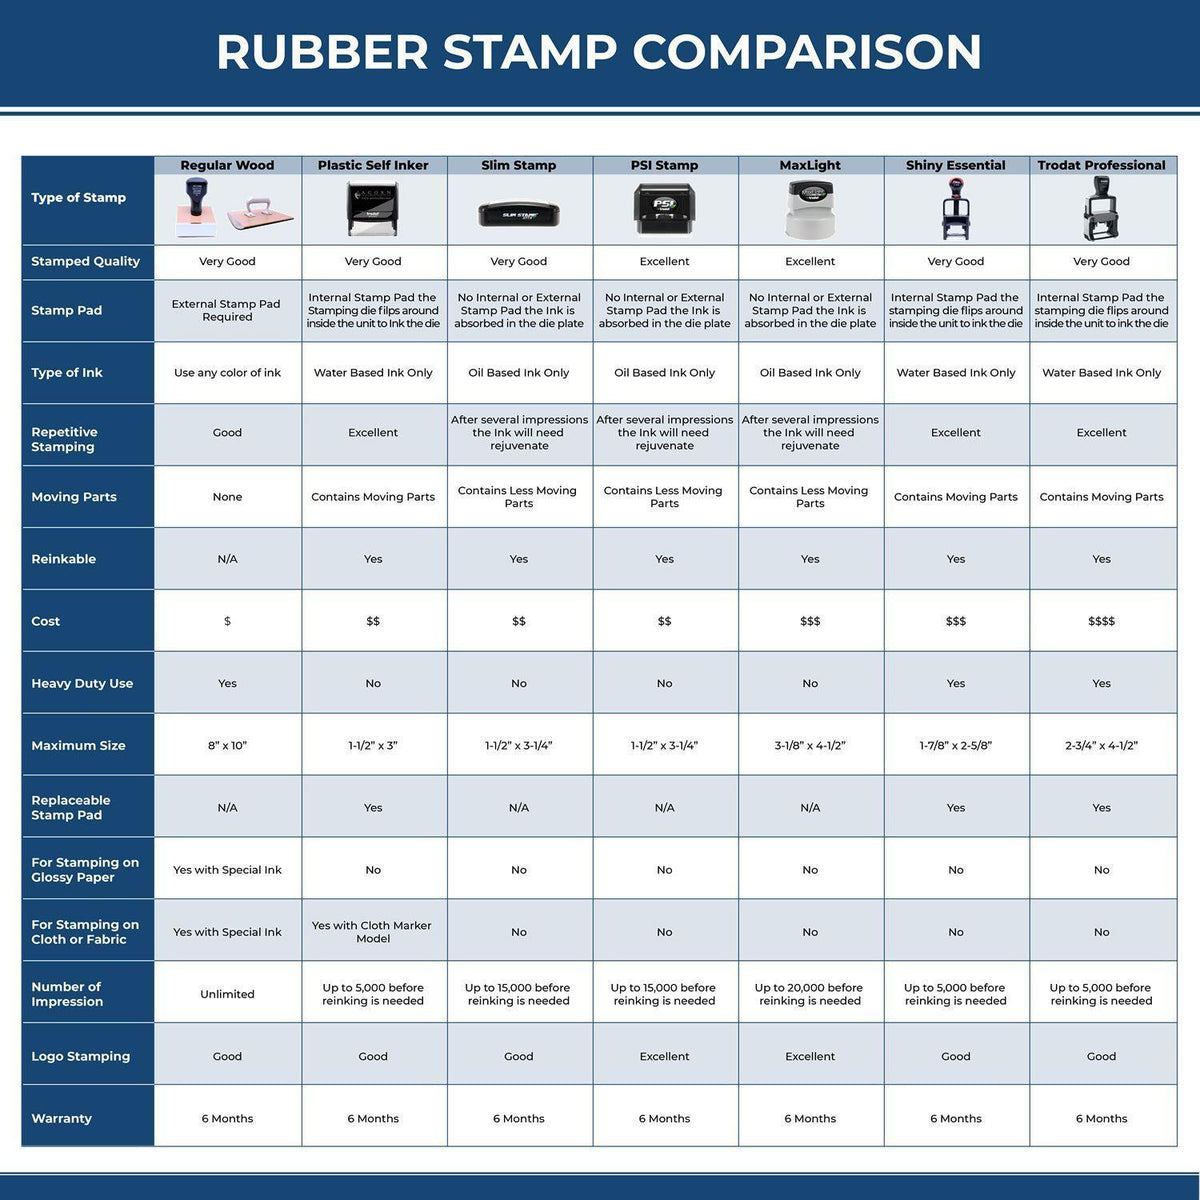 Admitted Rubber Stamp 4465R Rubber Stamp Comparison